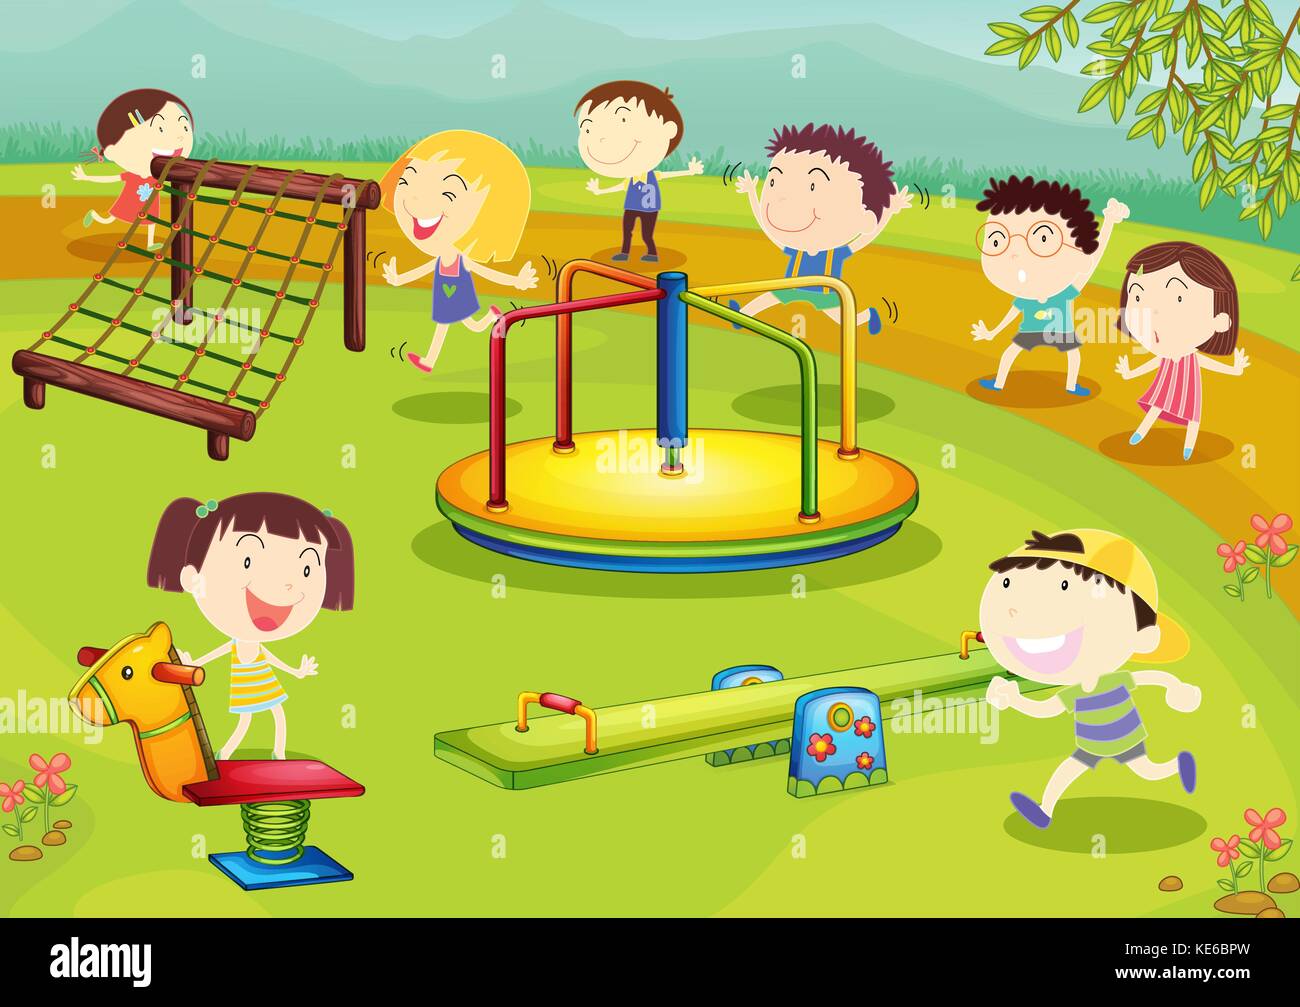 Children Playing In The Playground Illustration Stock Vector Image